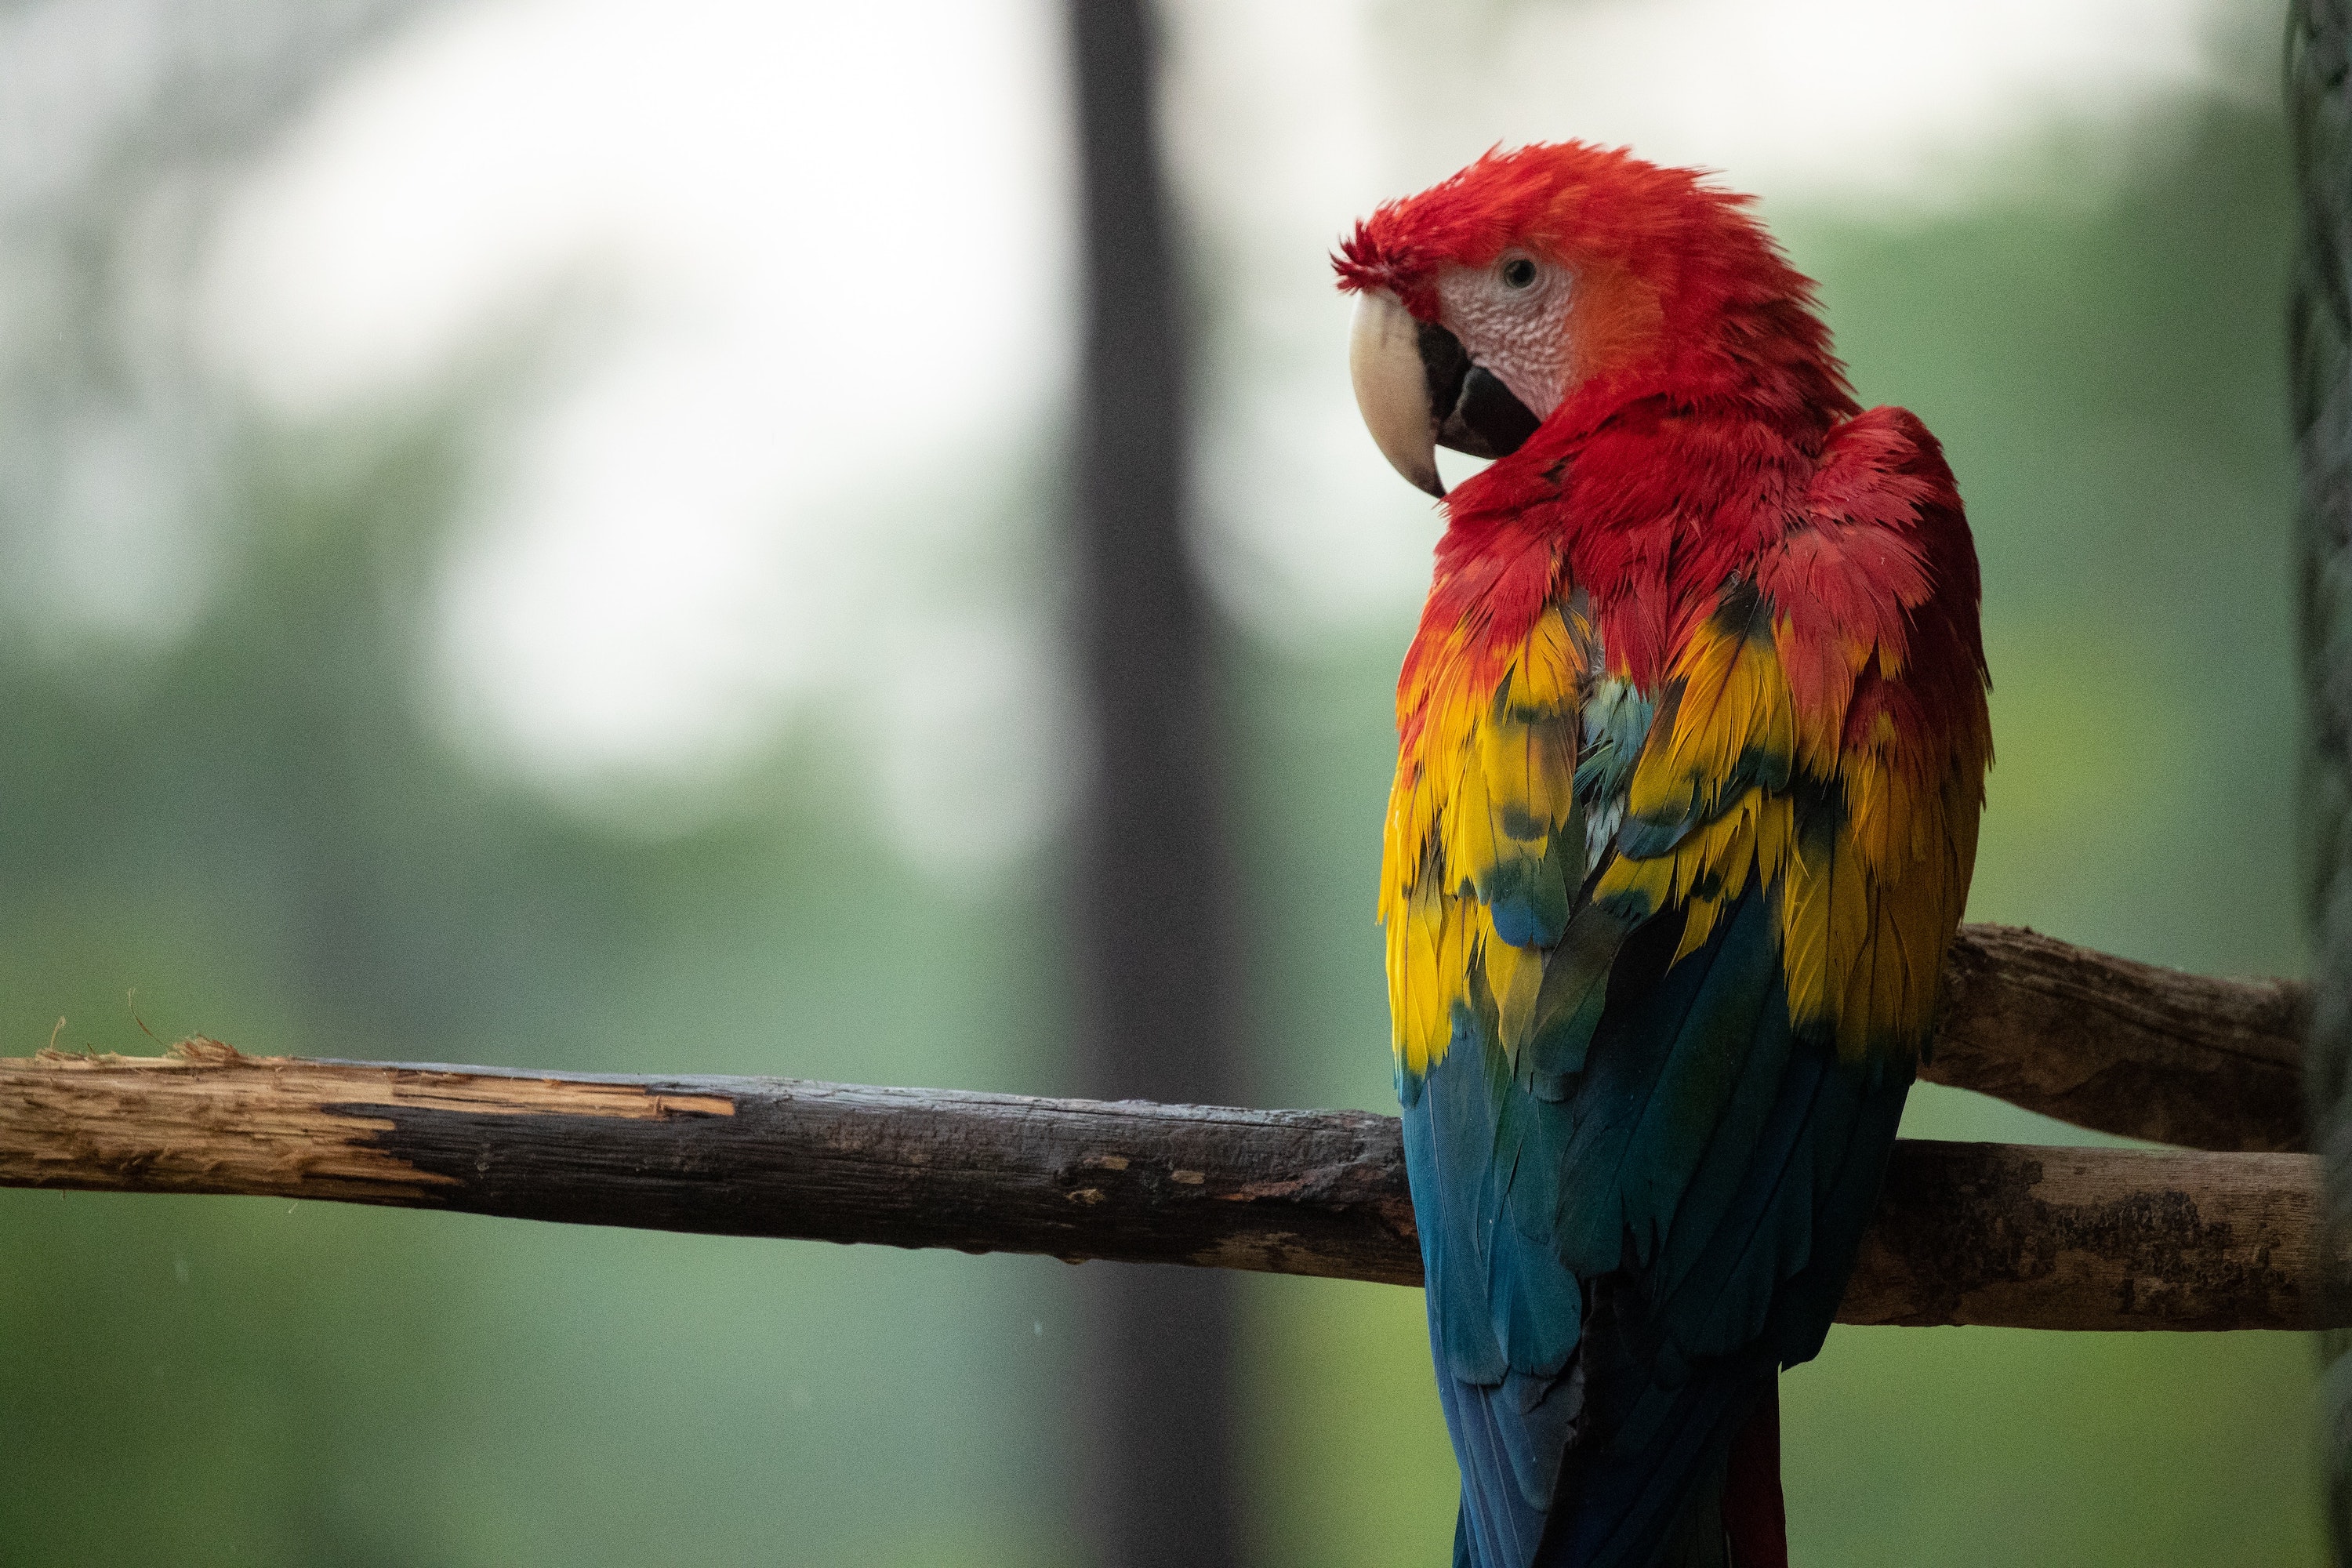 Image of a colorful parrot sitting on a branch